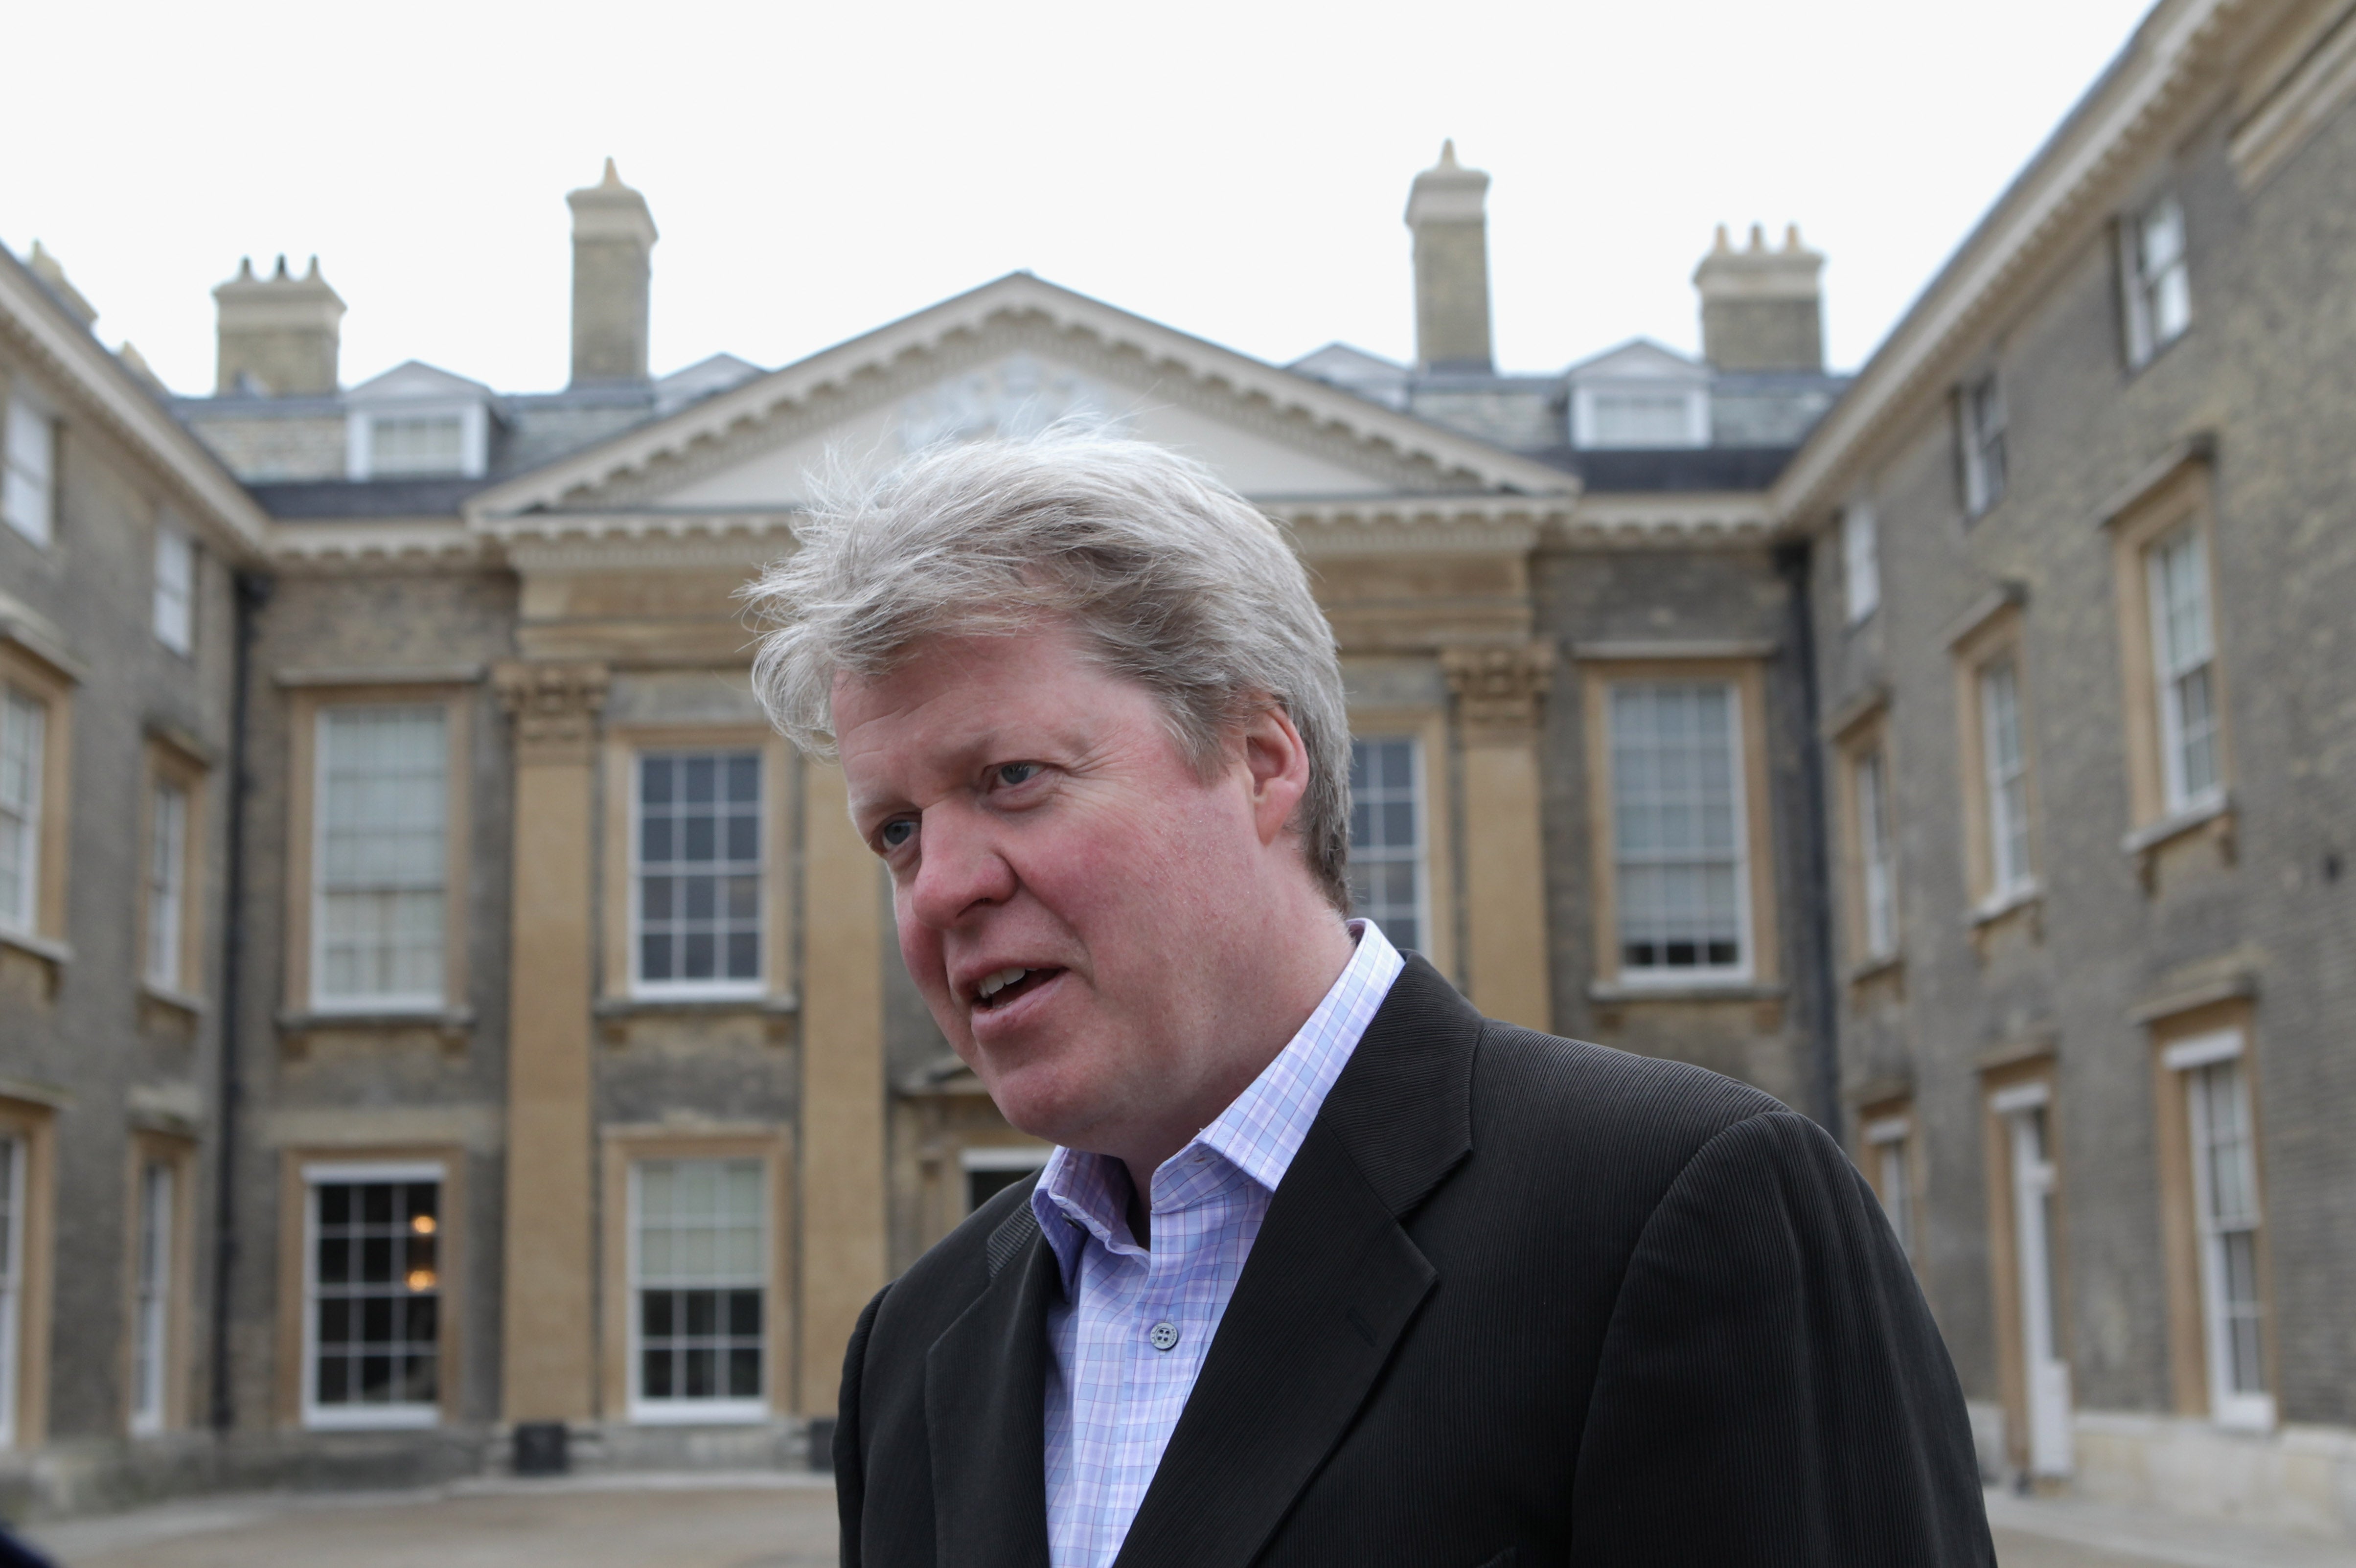 The ninth Earl of Spencer has spoken out about his experience at a boarding school